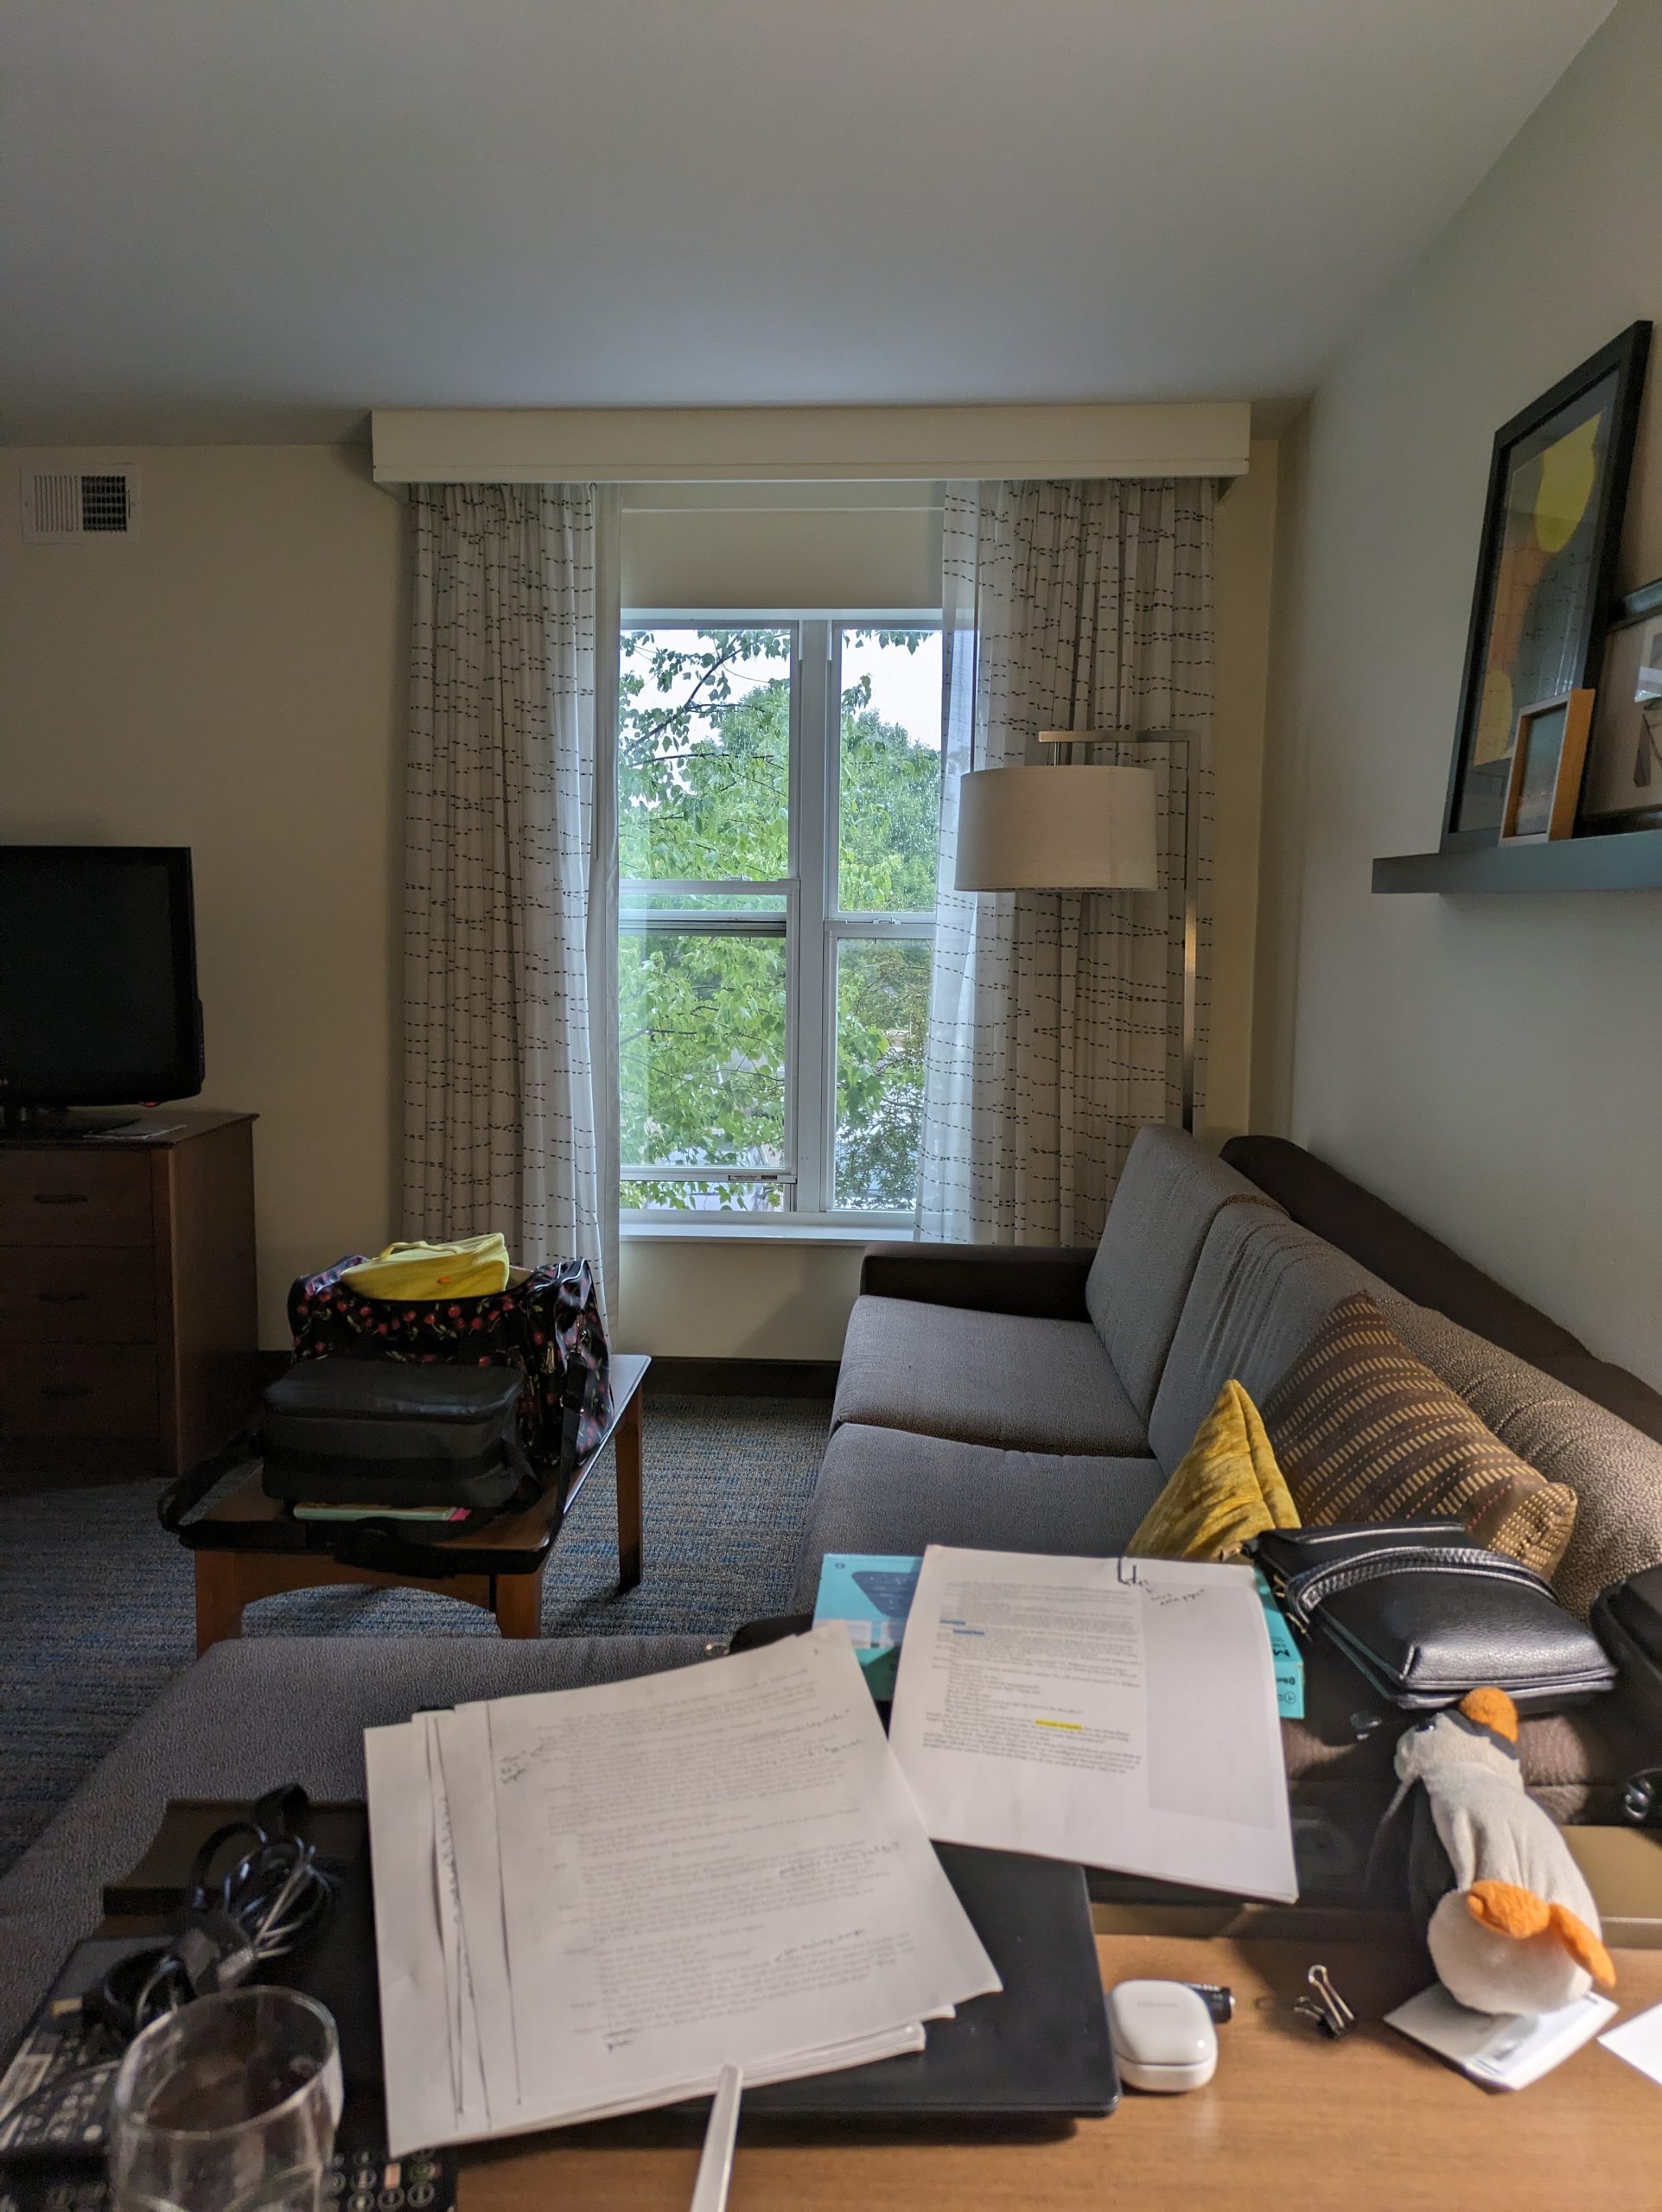 The window for my Solo Writer's Retreat hotel room